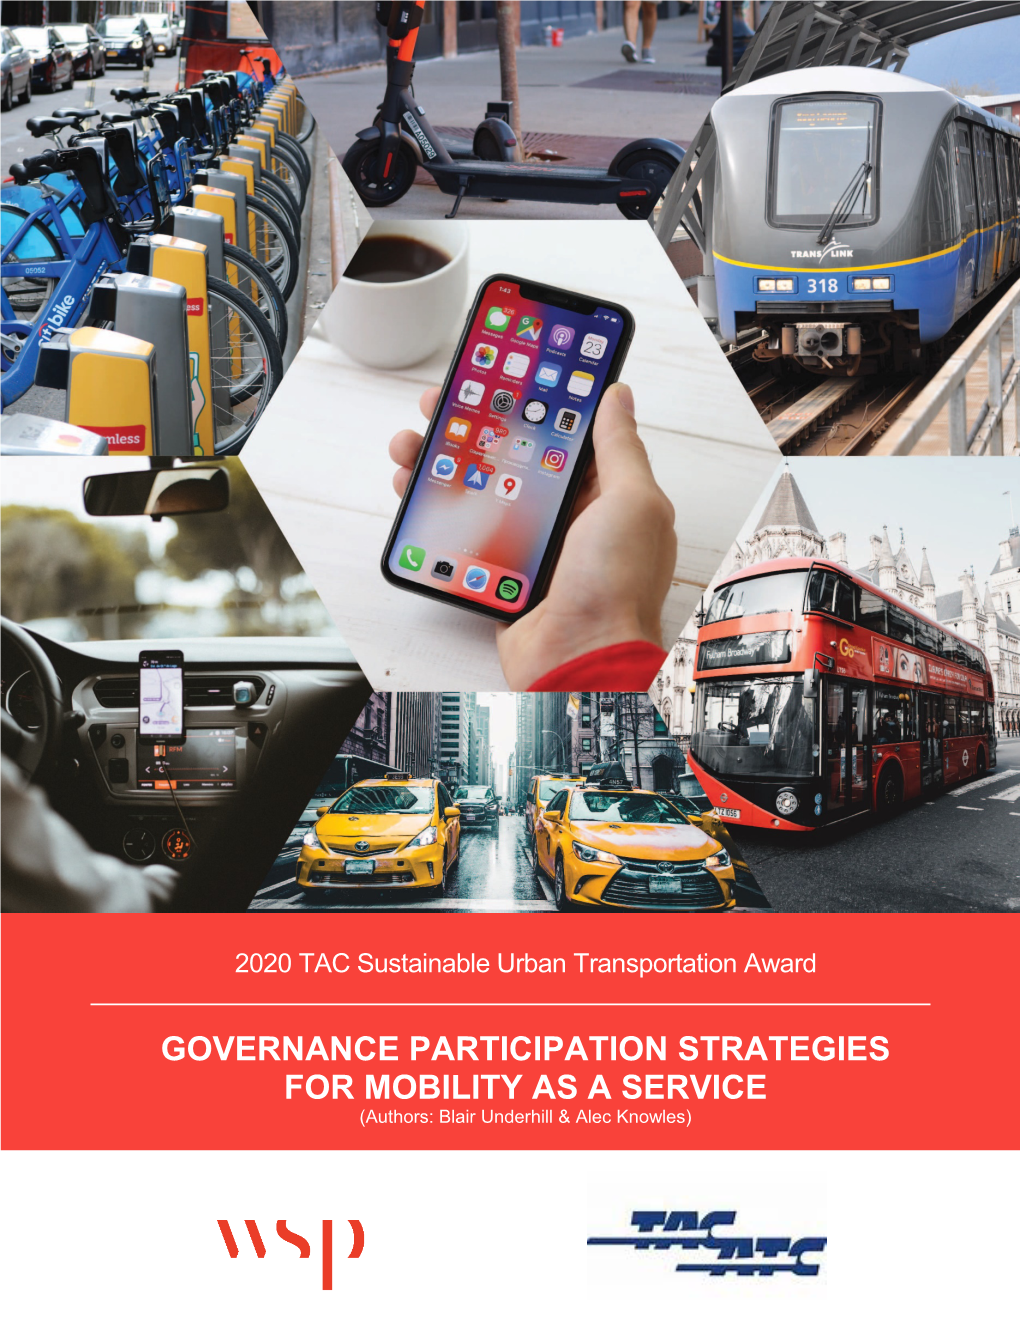 GOVERNANCE PARTICIPATION STRATEGIES for MOBILITY AS a SERVICE (Authors: Blair Underhill & Alec Knowles)